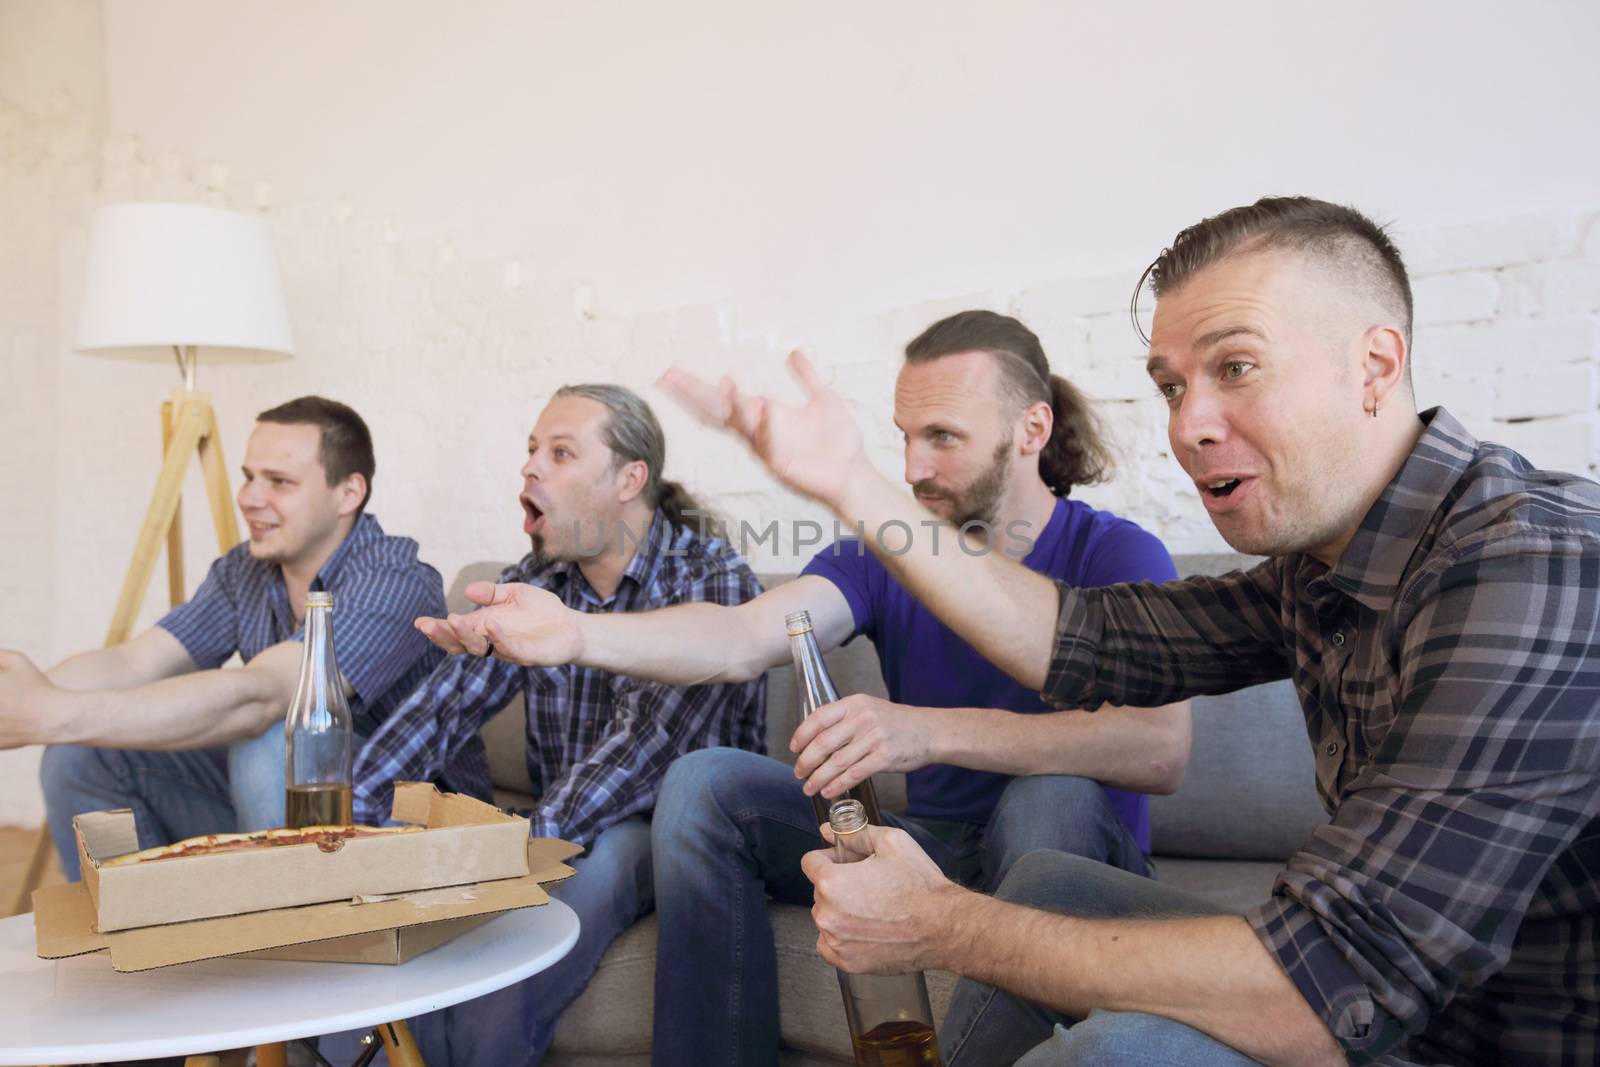 Male friends sports fans watching loosing football match on TV at home on couch sharing snacks drinking beer